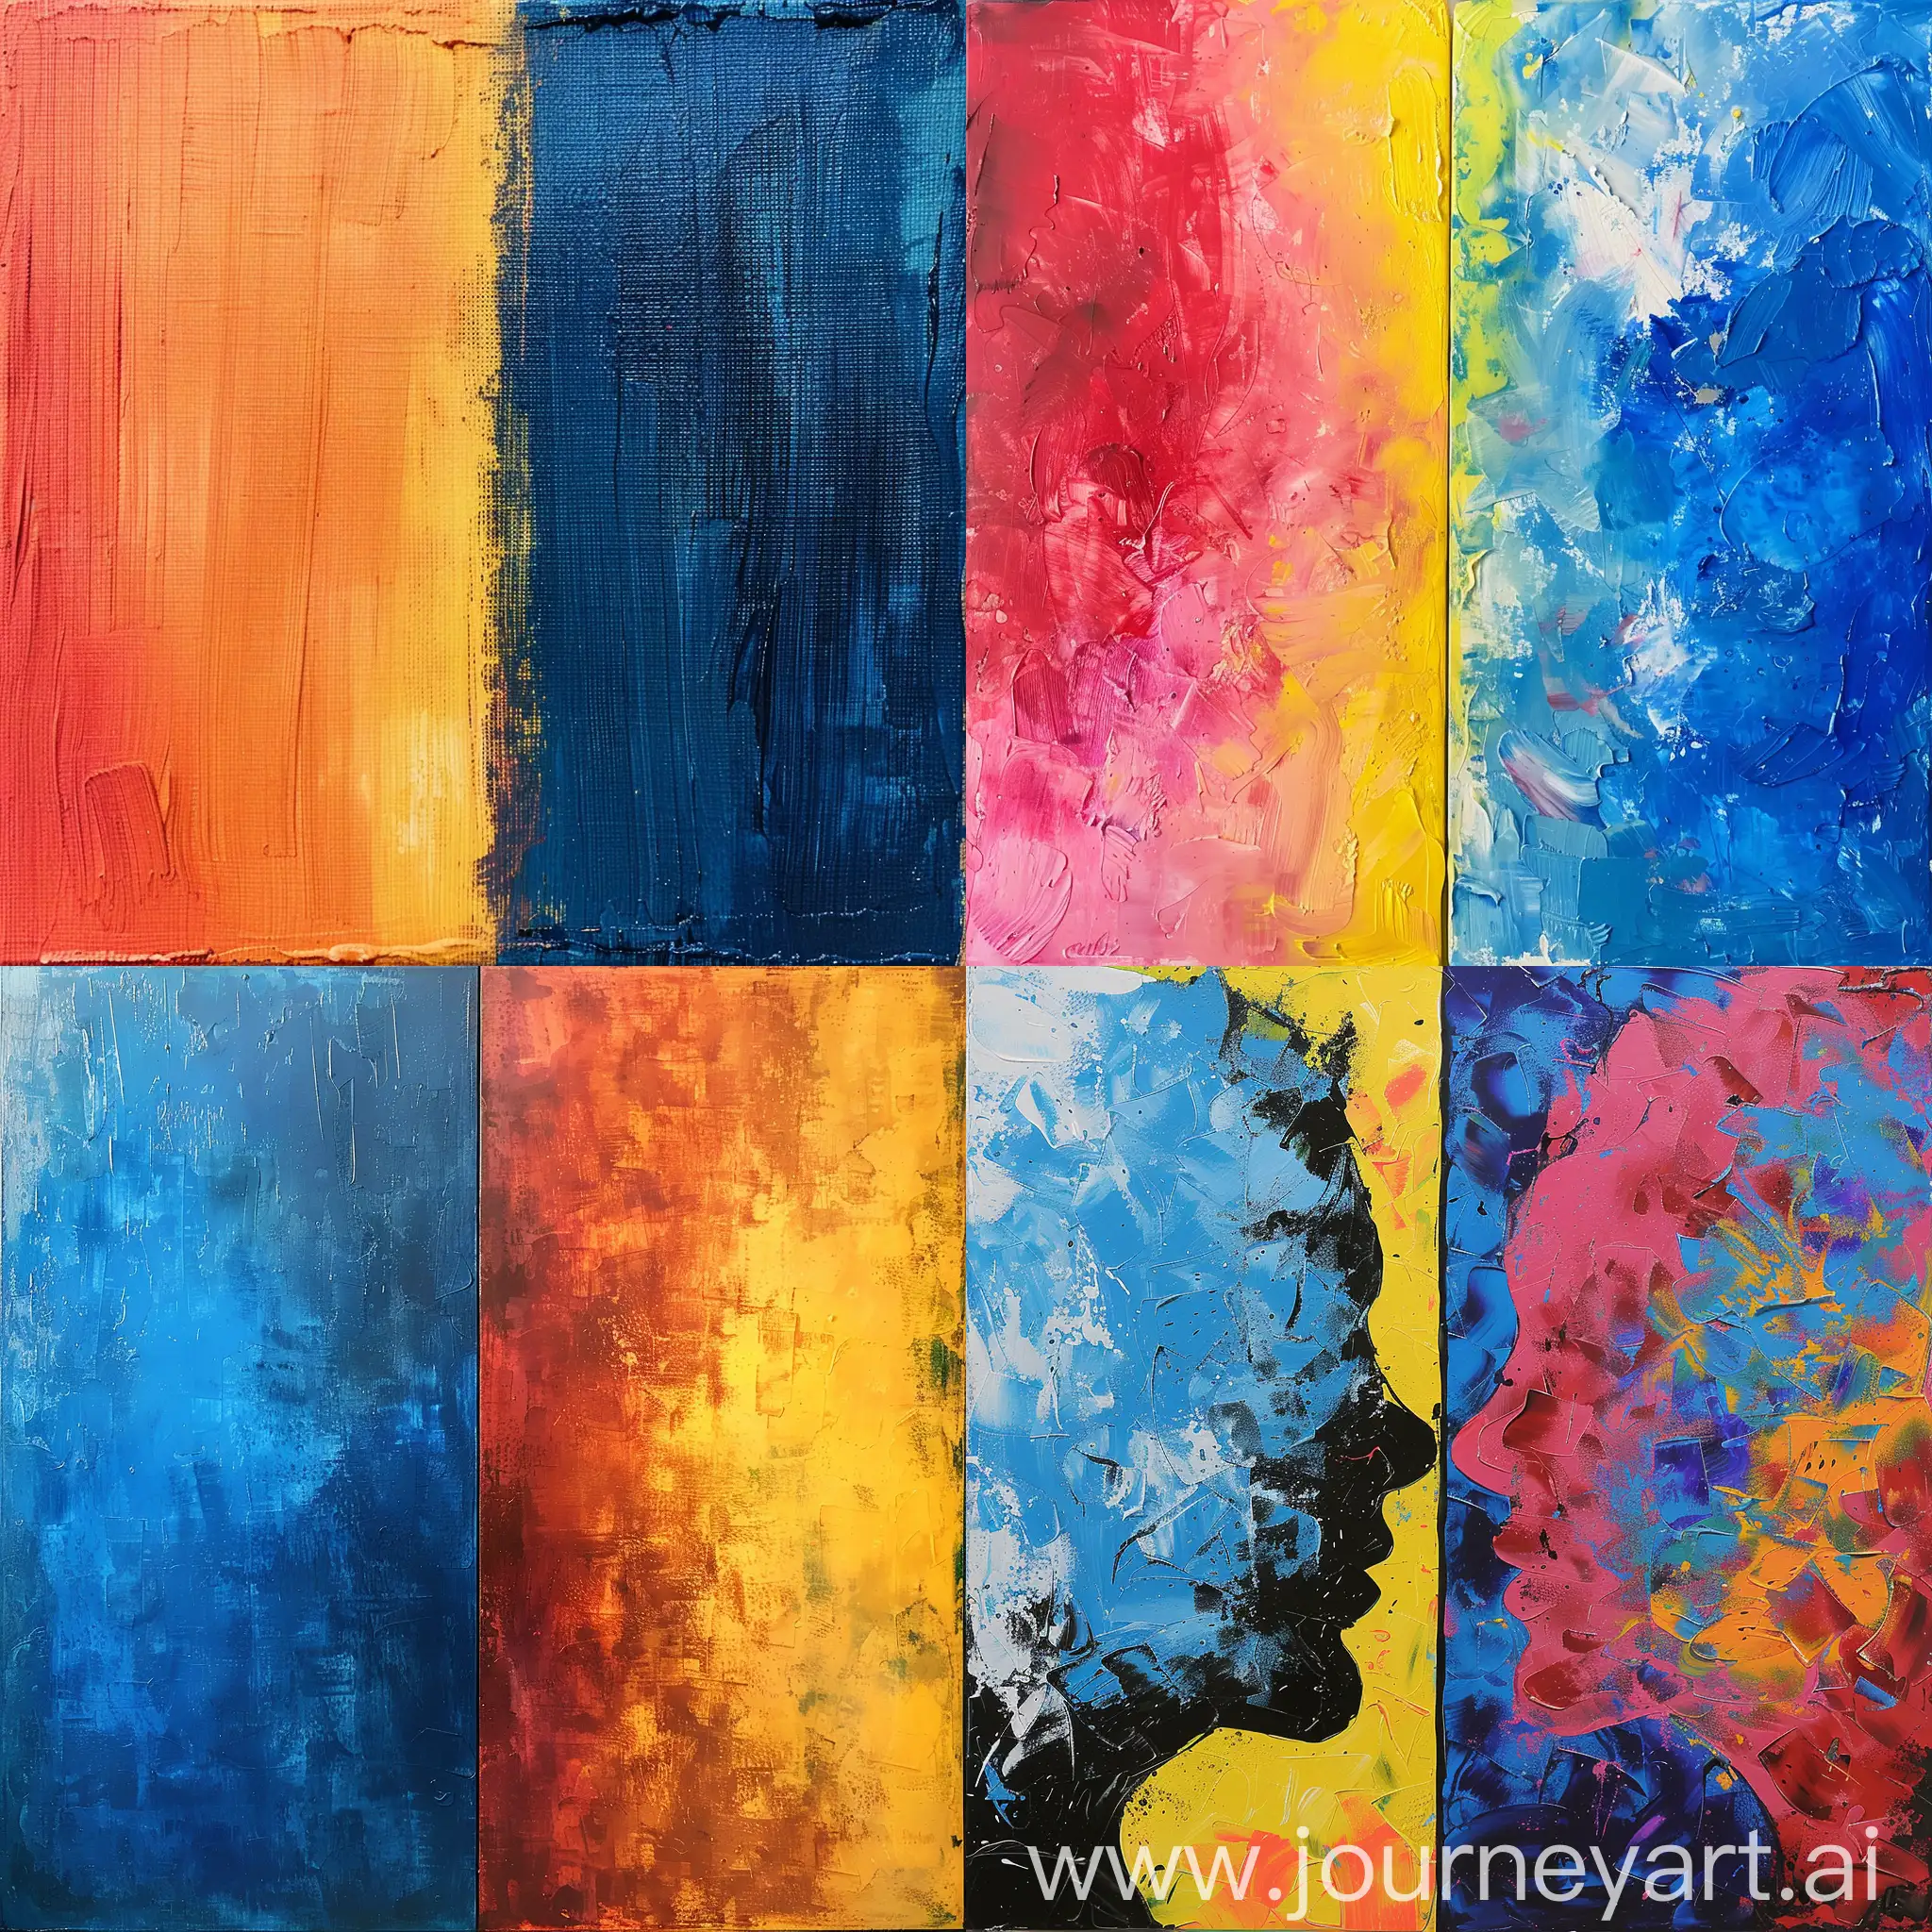 Vibrant-DualColor-Abstract-Art-Dynamic-Composition-in-Square-Format